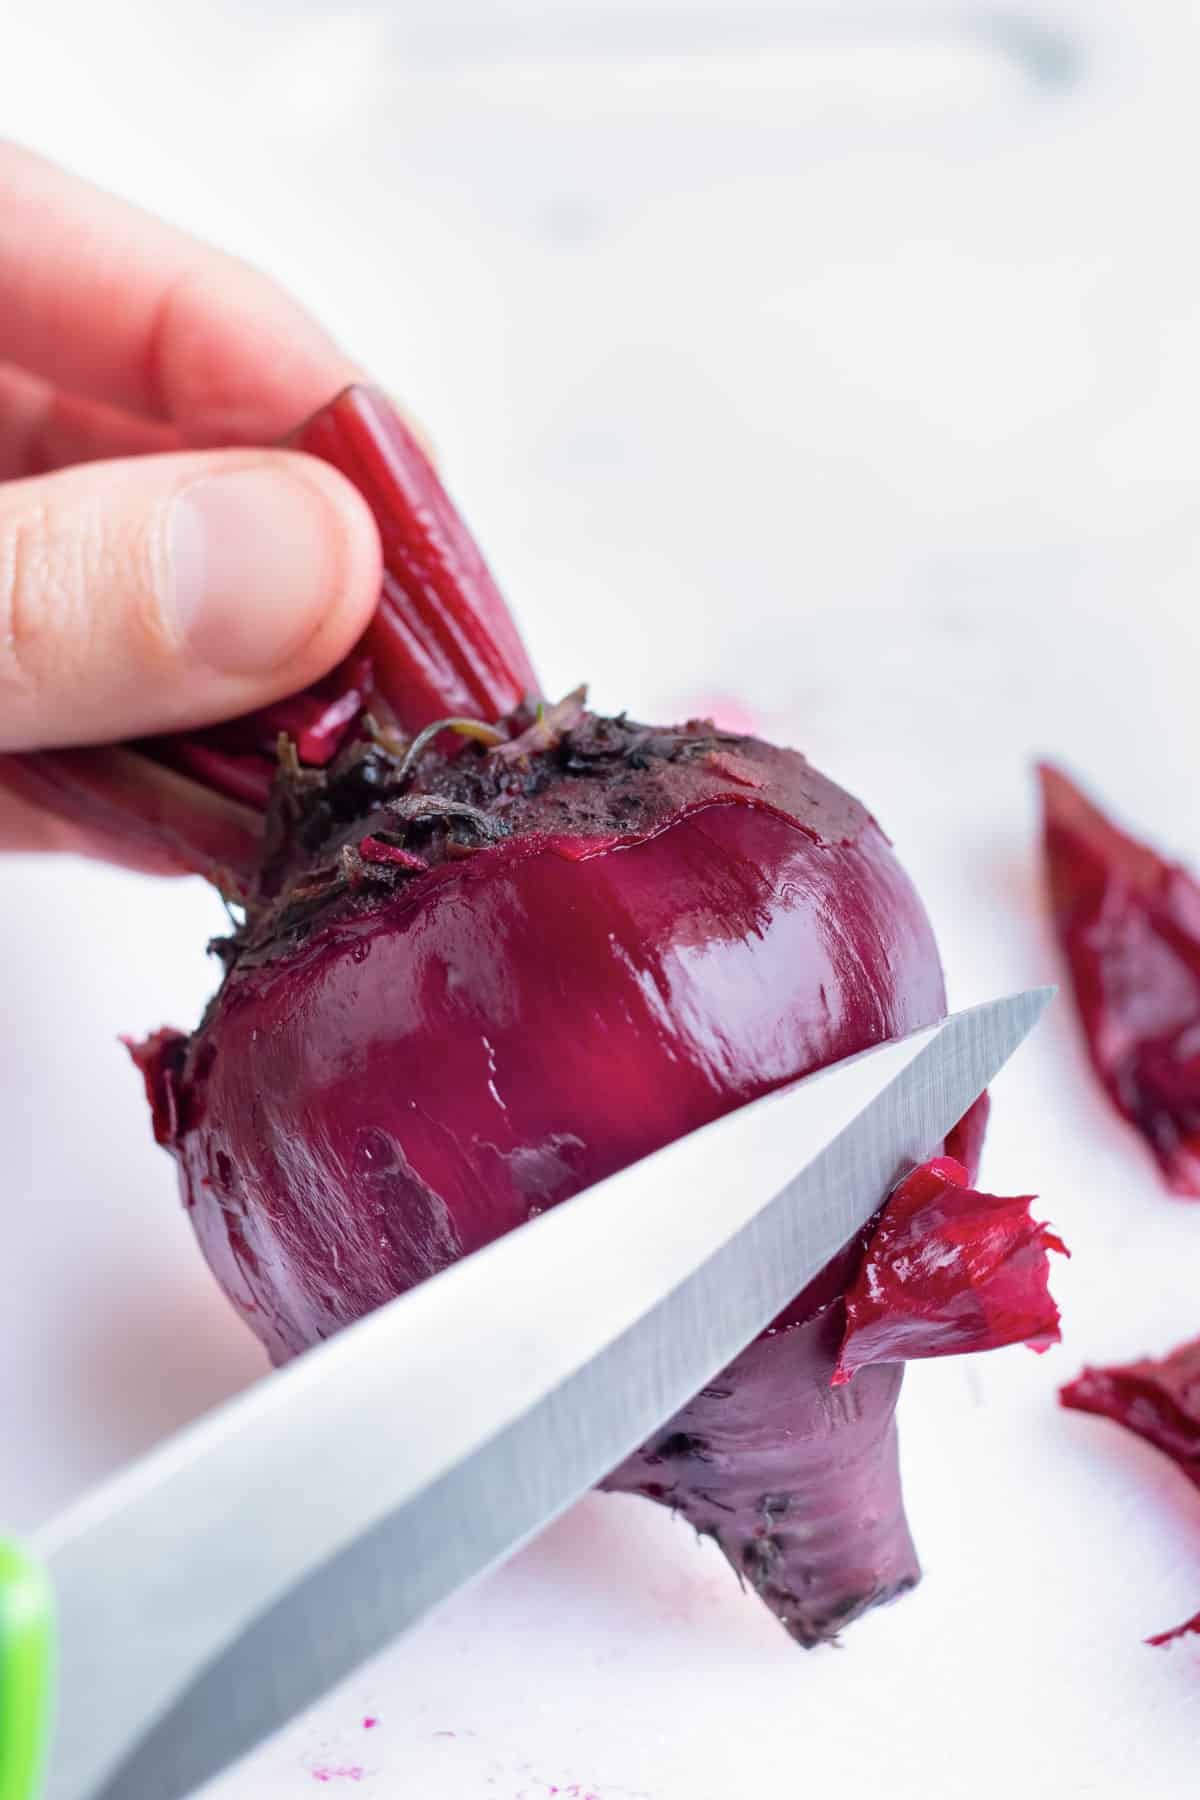 Whole beets are peeled with a pairing knife.